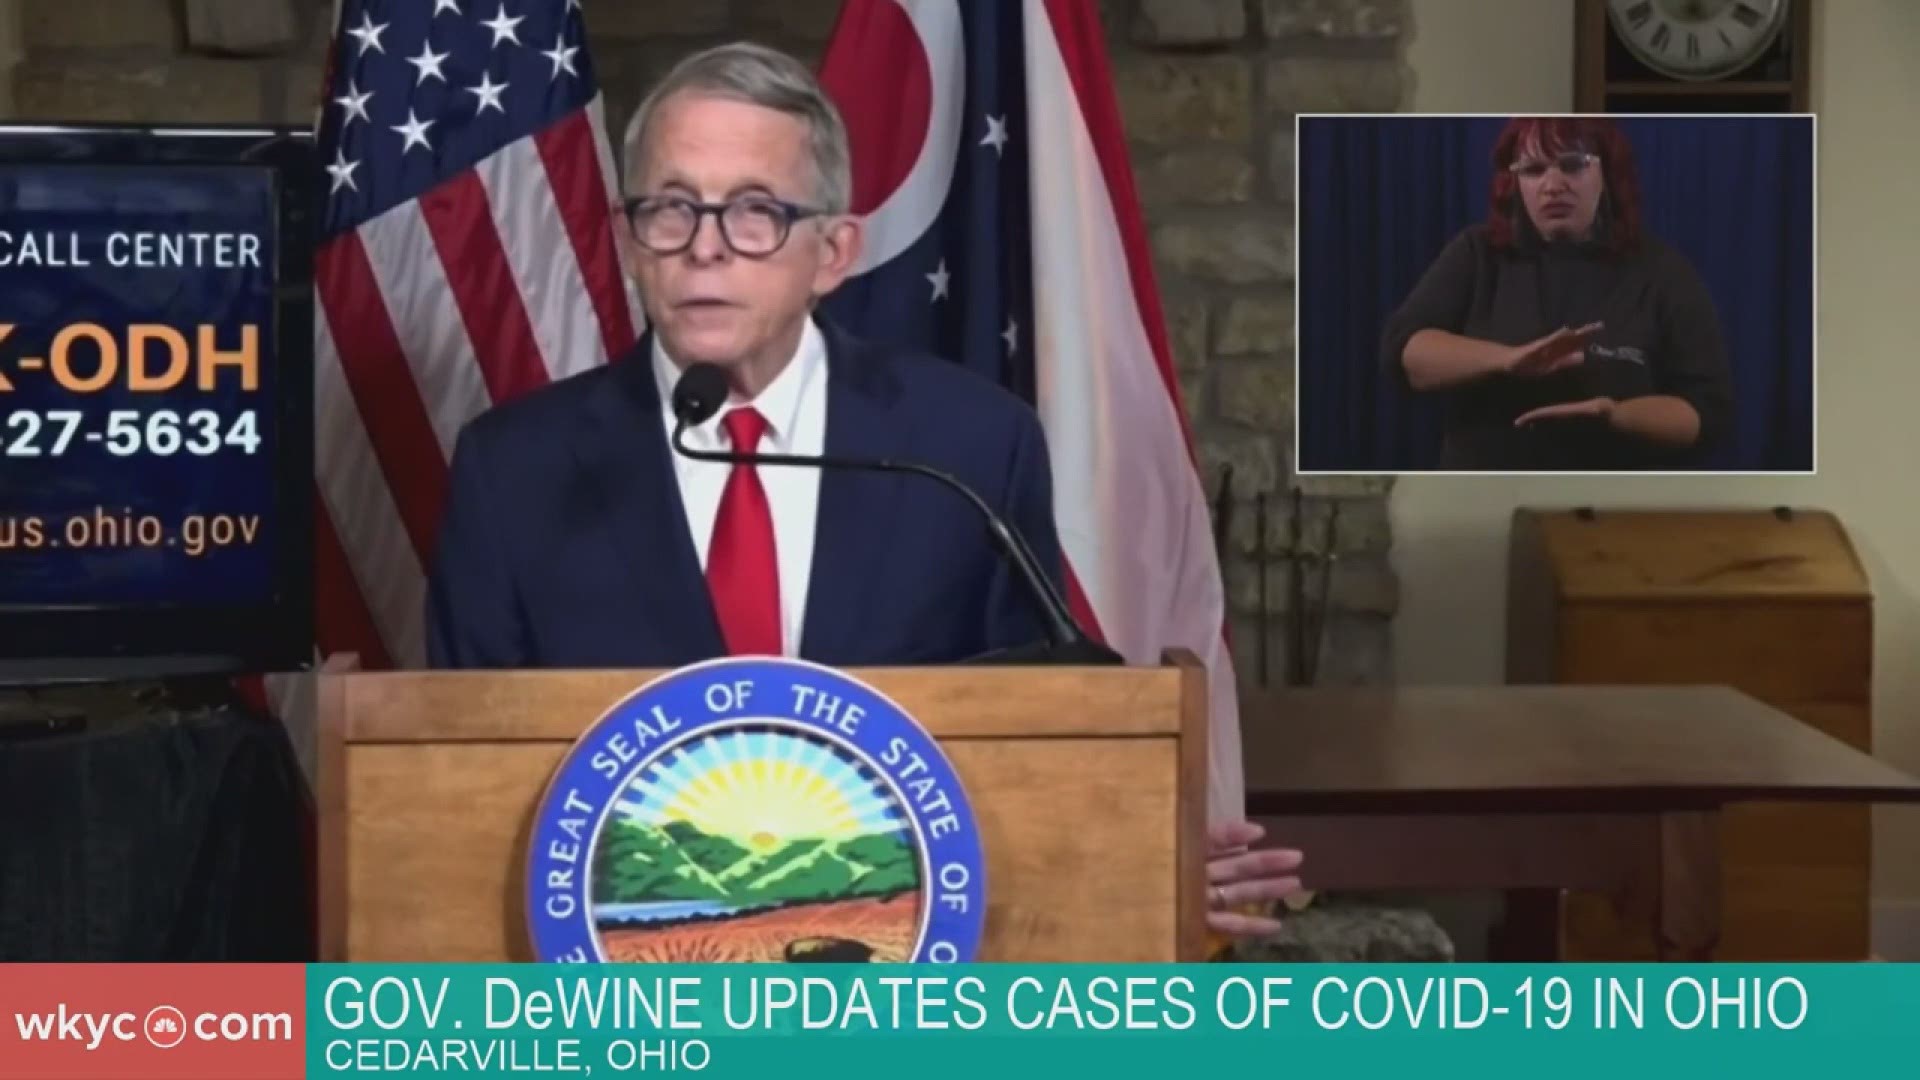 Oct. 20, 2020: Ohio Gov. Mike DeWine was asked if he would consider taking any new action on schools amid the growing COVID-19 cases. Here's what he said.